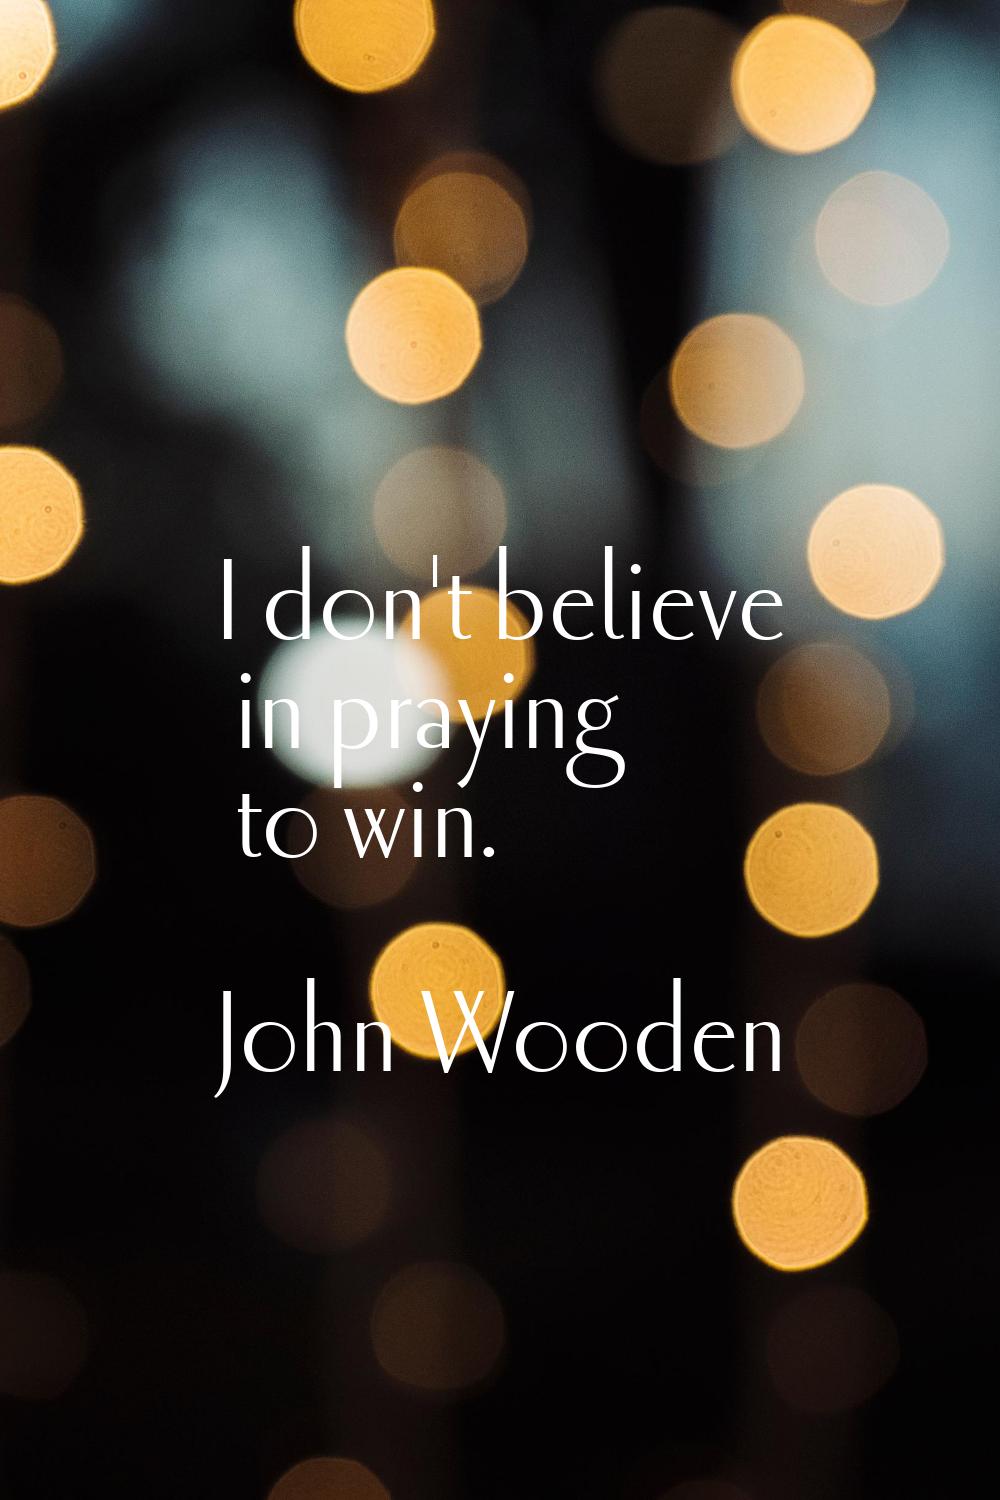 I don't believe in praying to win.